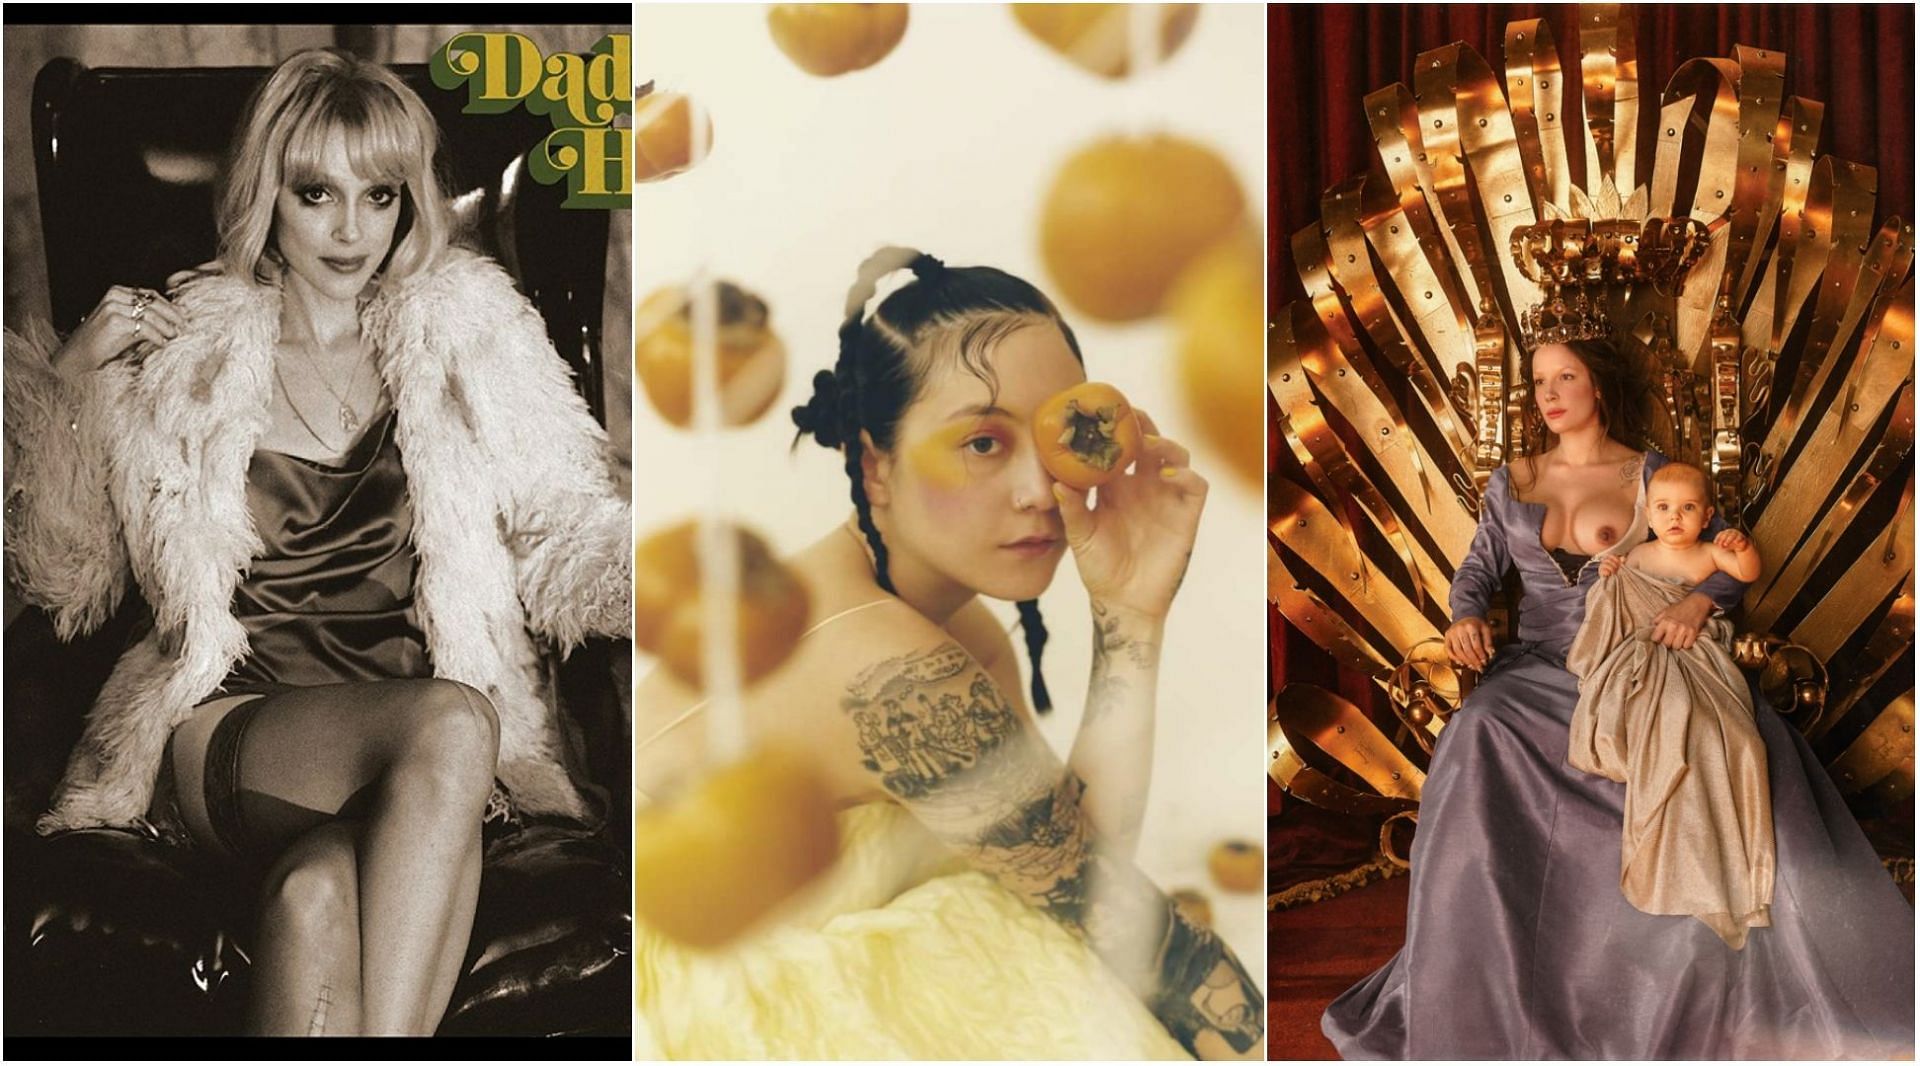 With the 2022 Grammys around the corner, the Alternative Music Album category is a hotly-contested one. (Images via Instagram: @st_vincent, @jbrekkie, @iamhalsey)